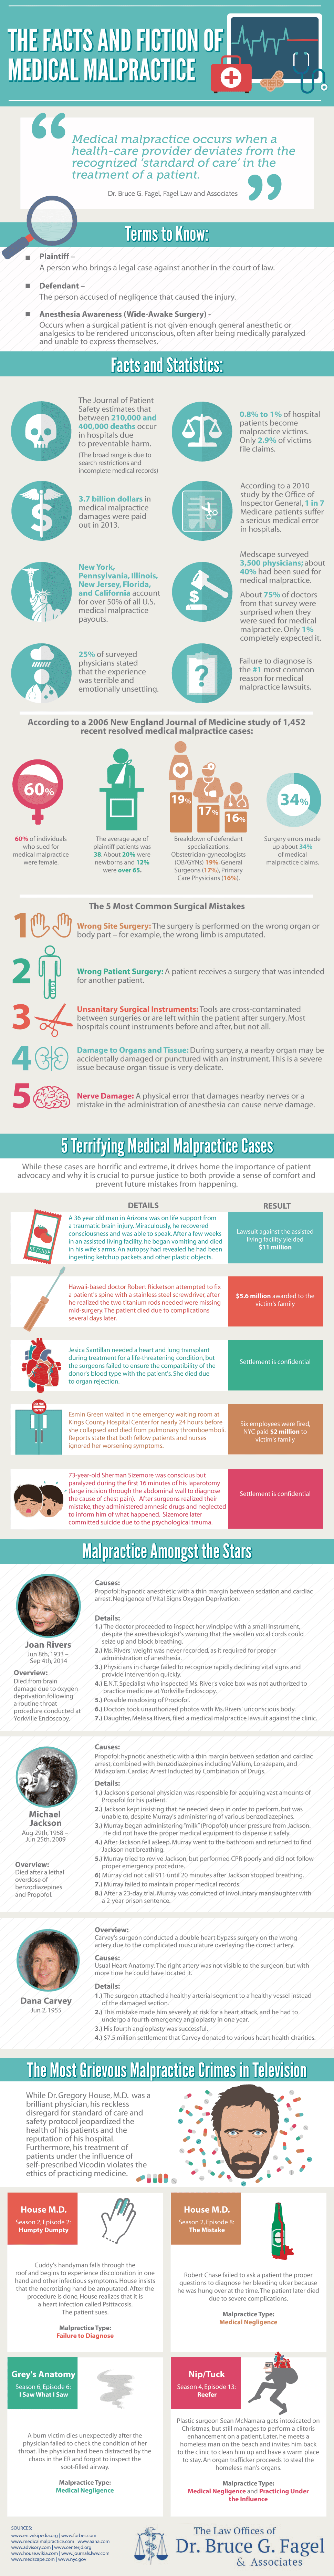 The Facts and Fiction of Medical Malpractice - FagelLaw.com - Infographic